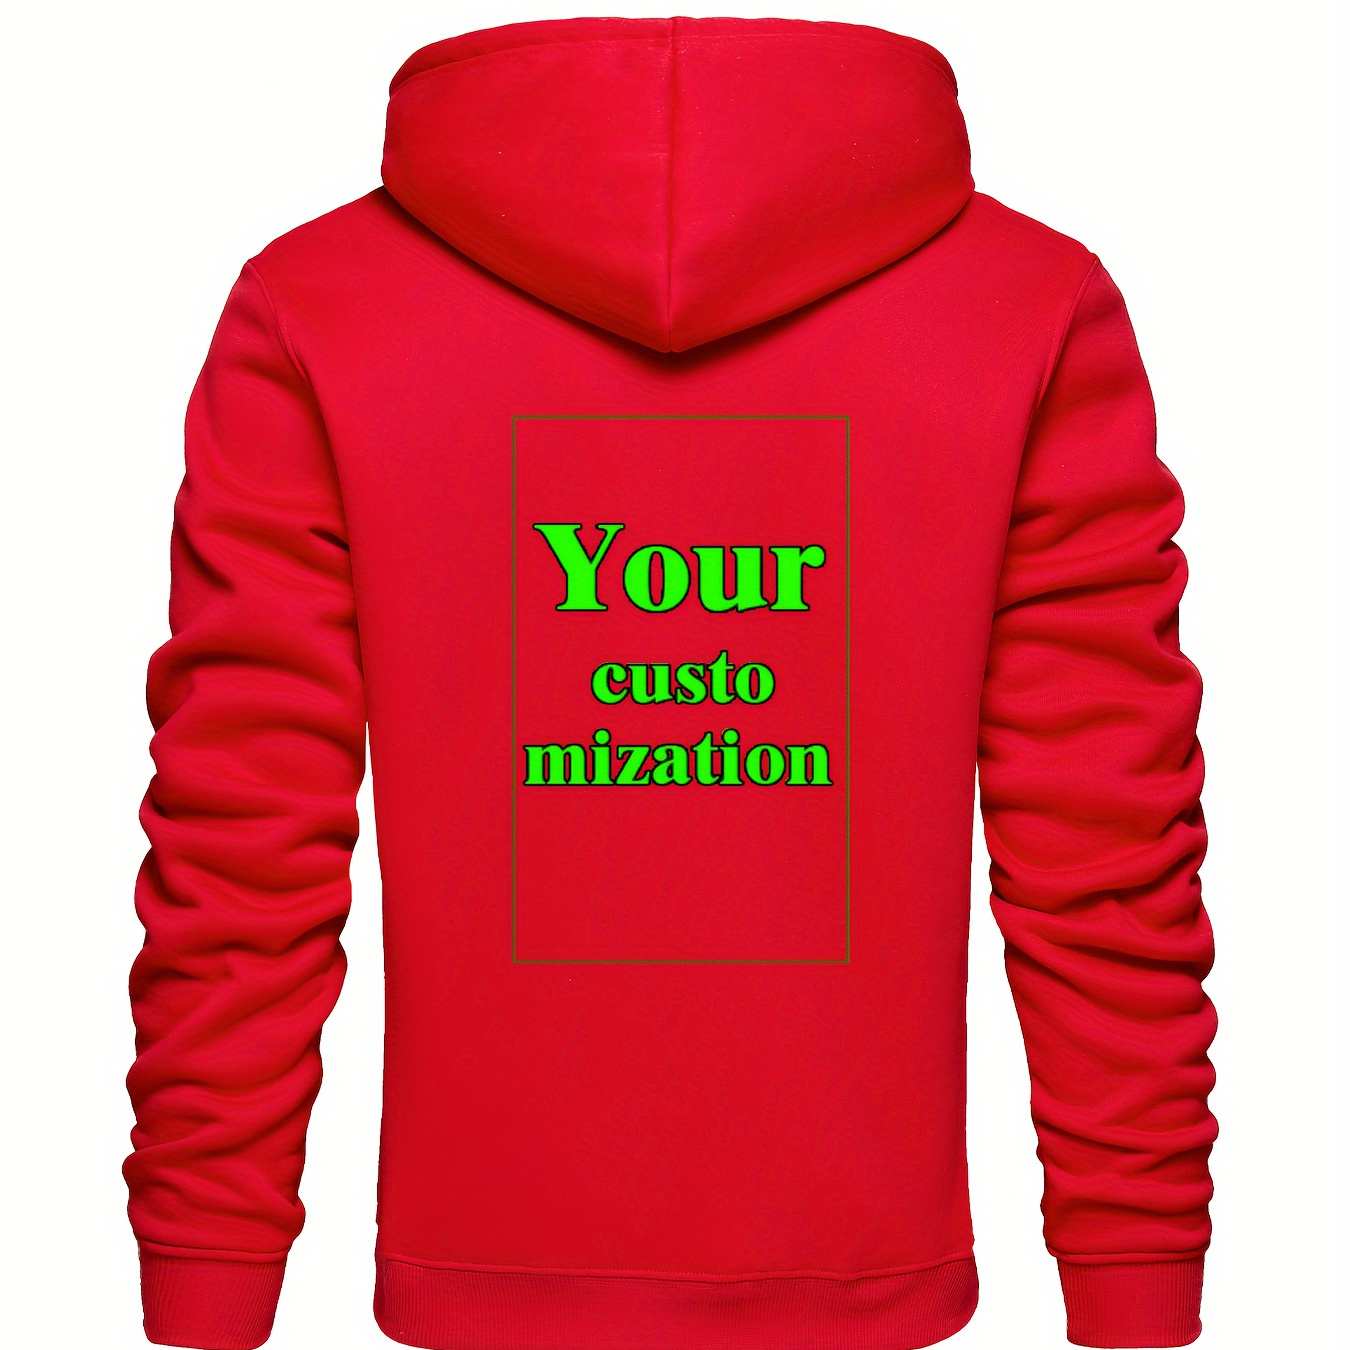 

Customized Print Hoodie, Cool Hoodies For Men, Men's Casual Pullover Hooded Sweatshirt With Kangaroo Pocket Streetwear For Winter Fall, As Gifts